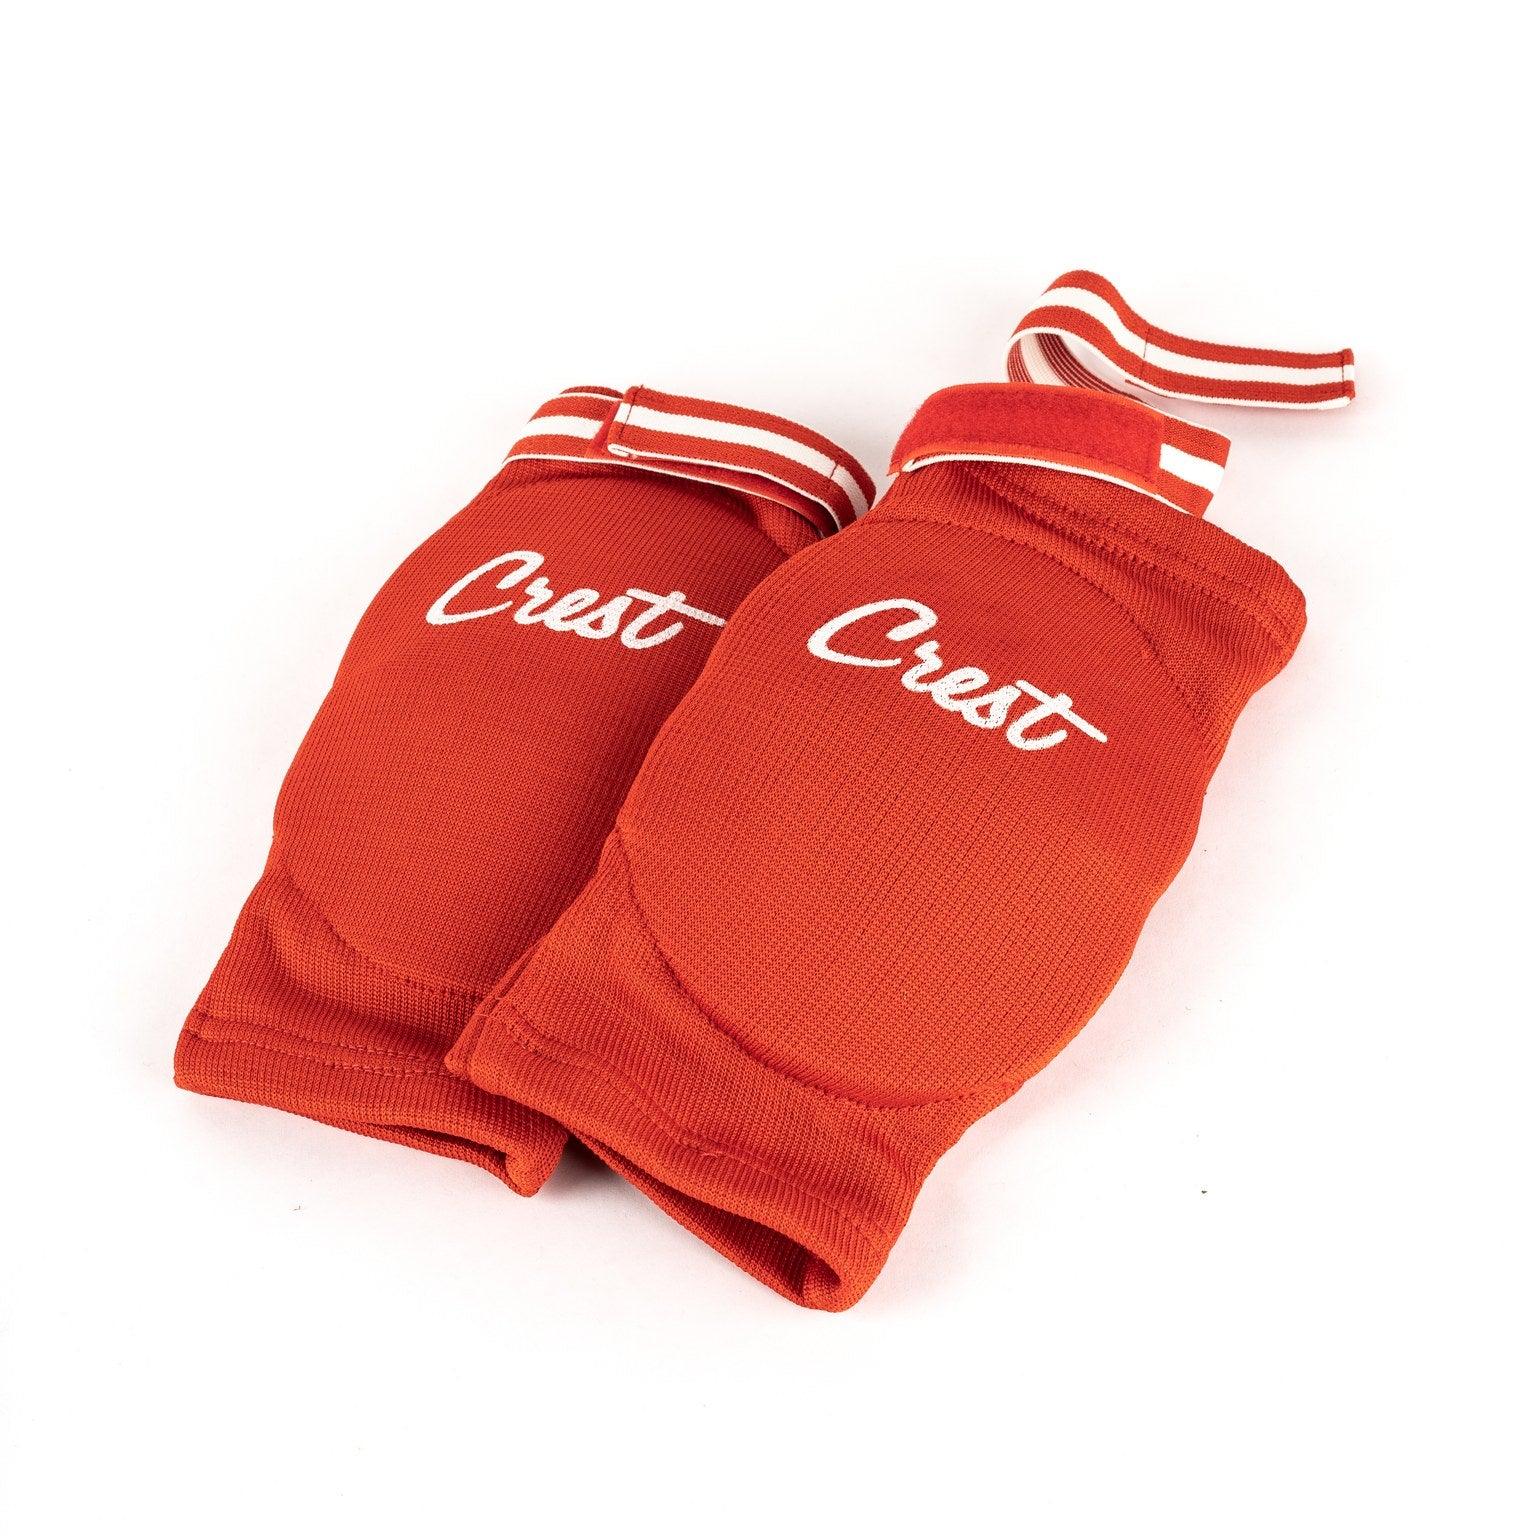 Elbow guards - one size - Crest - PFG